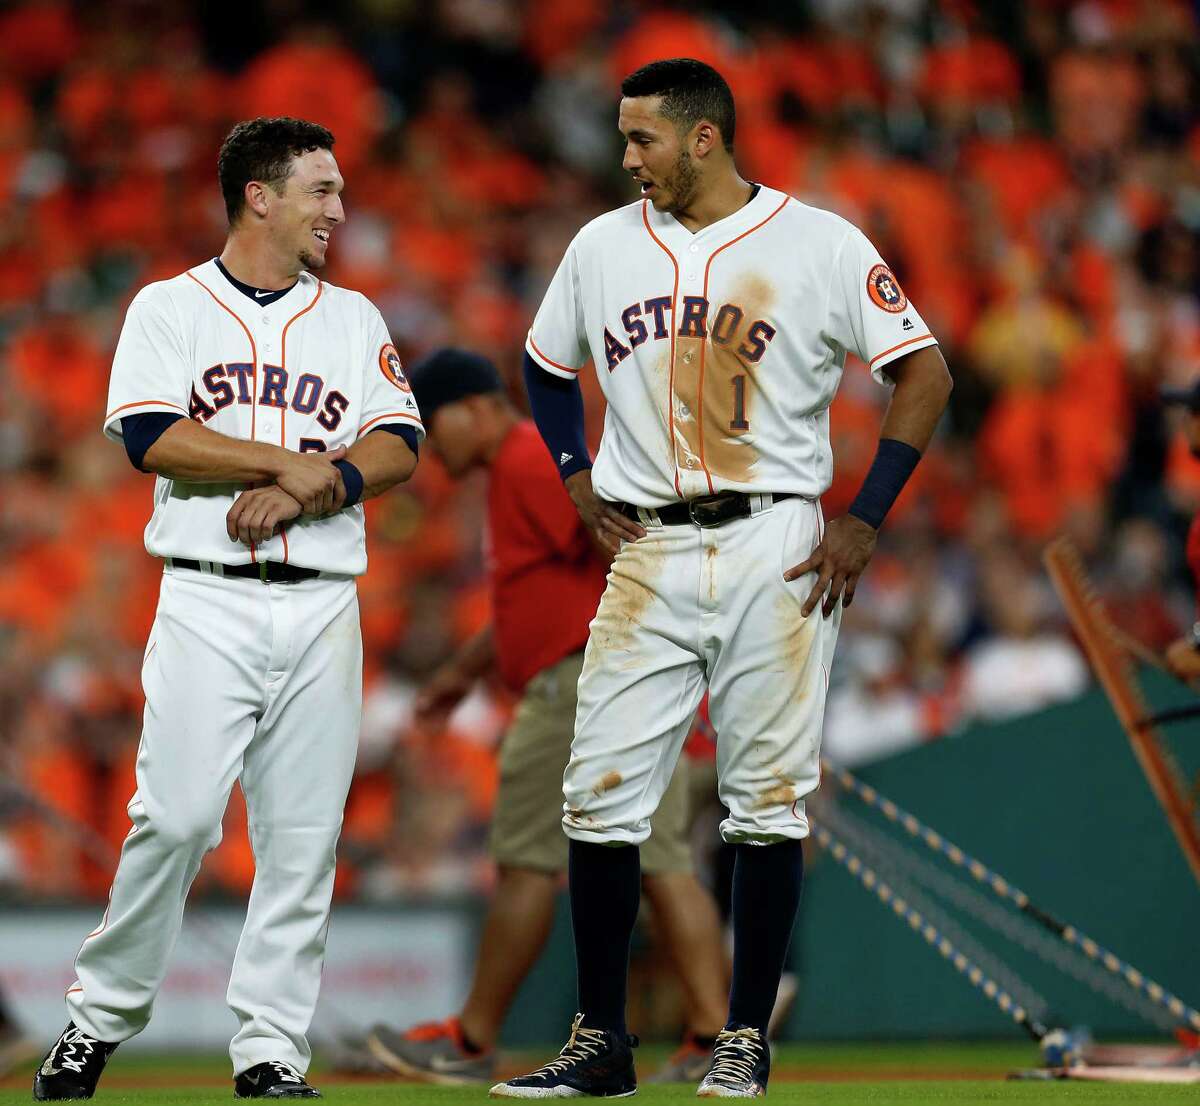 Houston Astros third baseman Alex Bregman (2) chats with shortstop Carlos Correa (1) after his flyout ending the sixth inning of an MLB game at Minute Maid Park, Monday, July 25, 2016, in Houston.